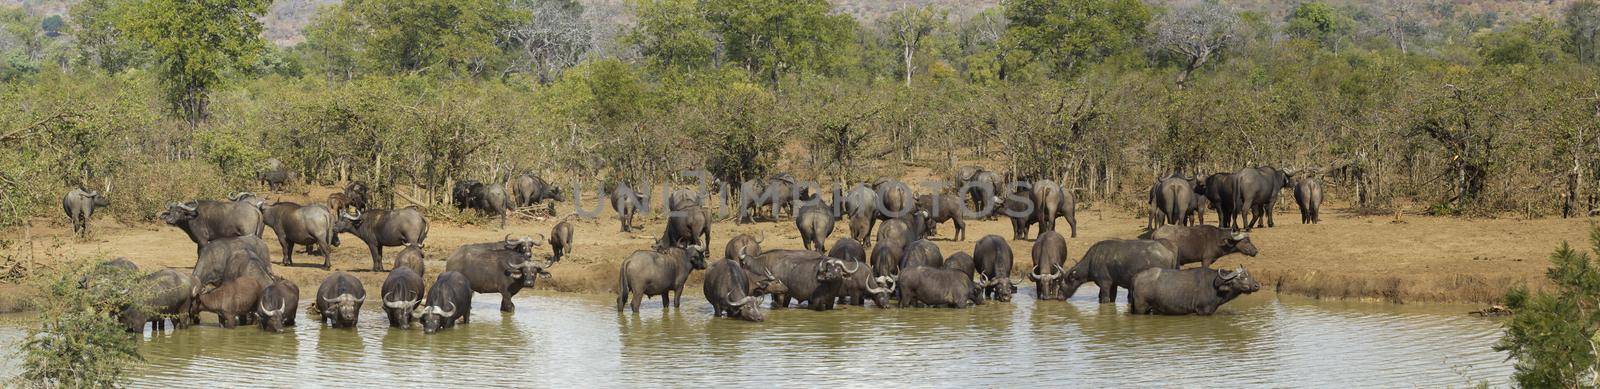 African buffalo herd,drinking in waterhole in Kruger National park, South Africa ; Specie Syncerus caffer family of Bovidae